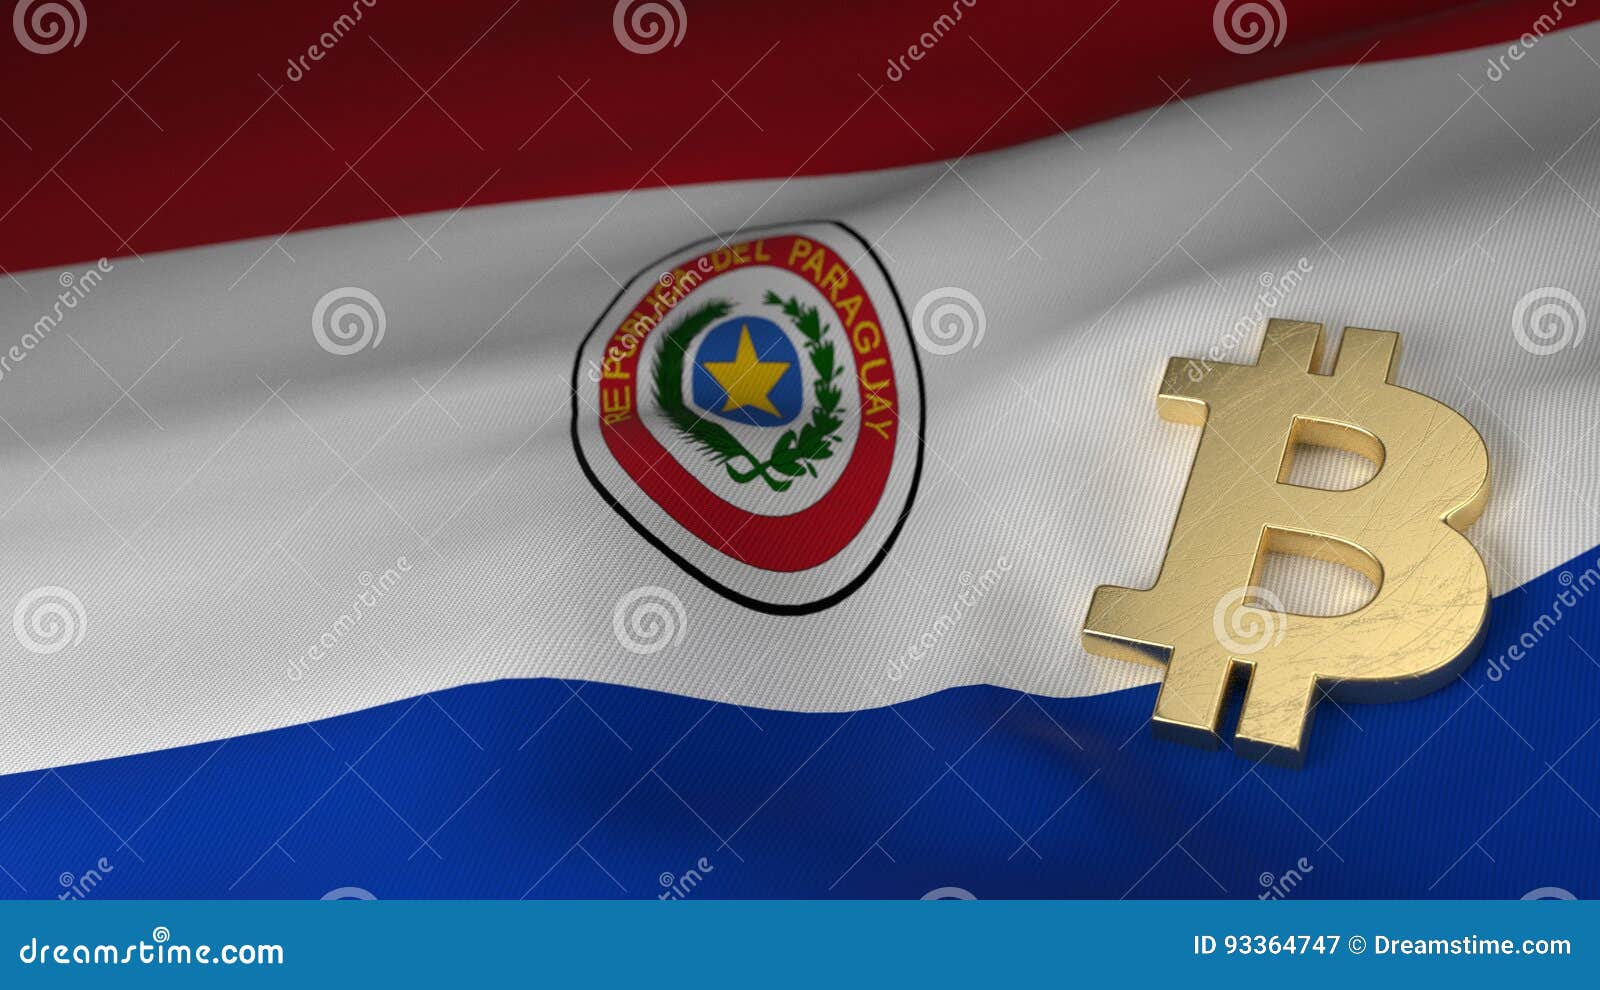 Will Paraguay Invest Its Excess Power Into Bitcoin Mining?